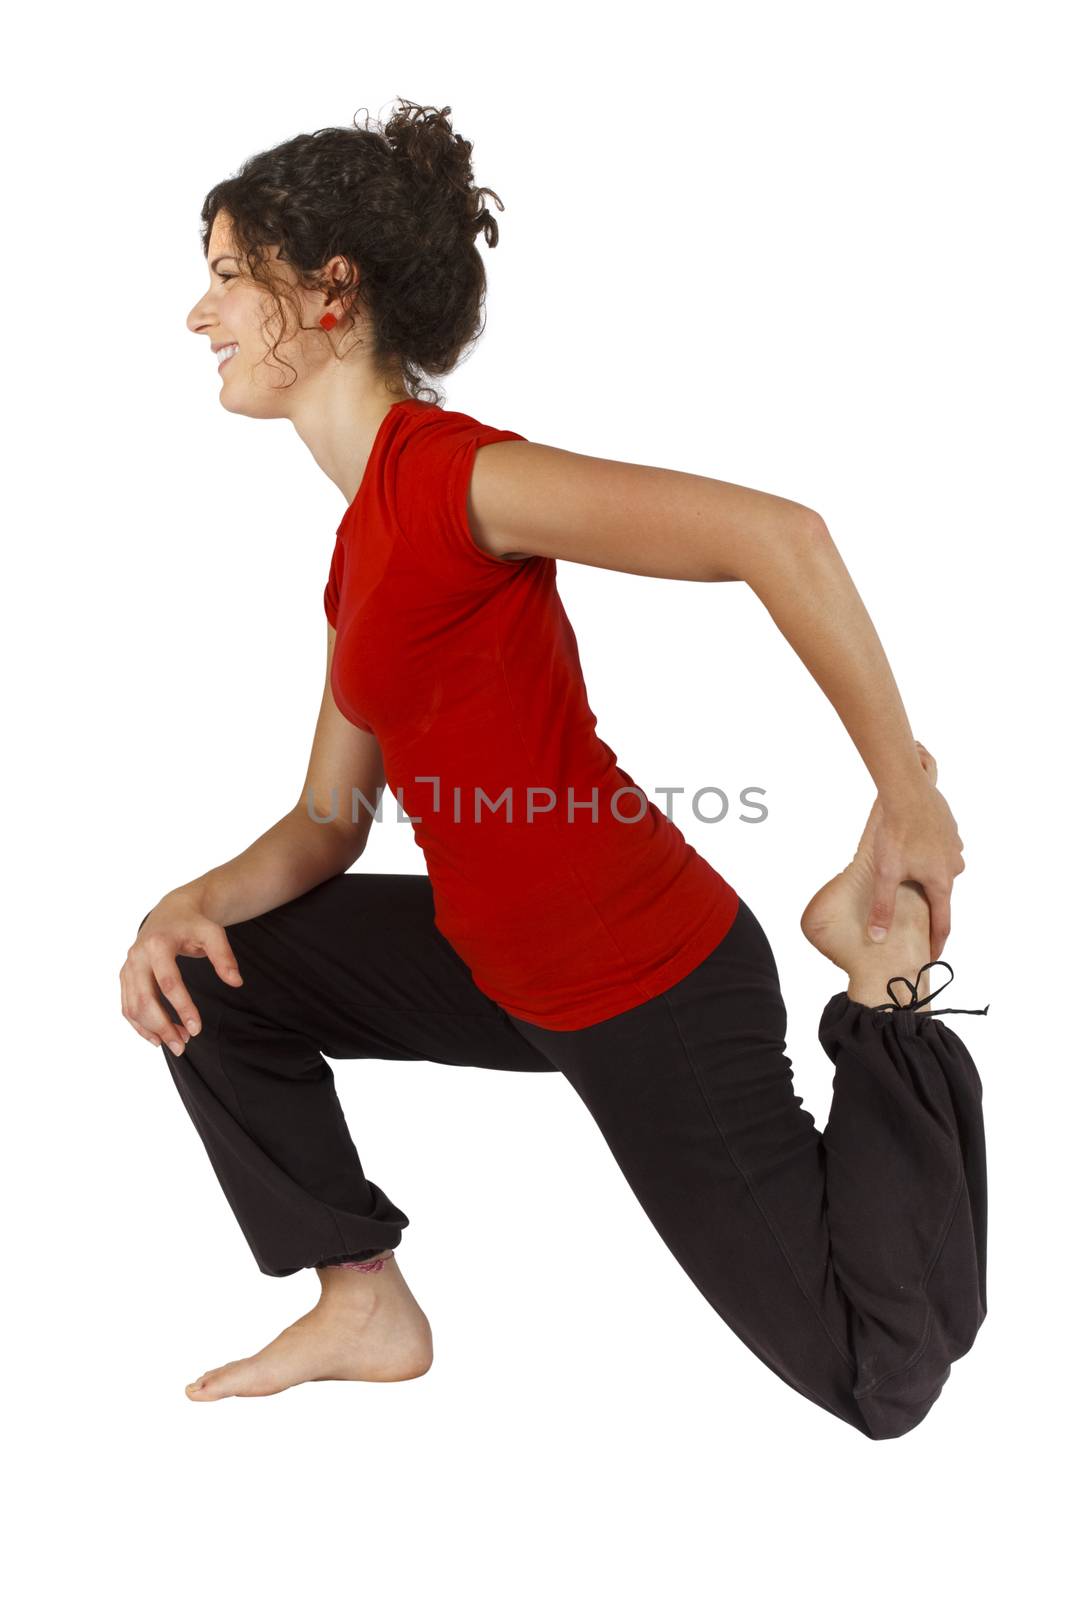 Young woman doing some exercise on floor.